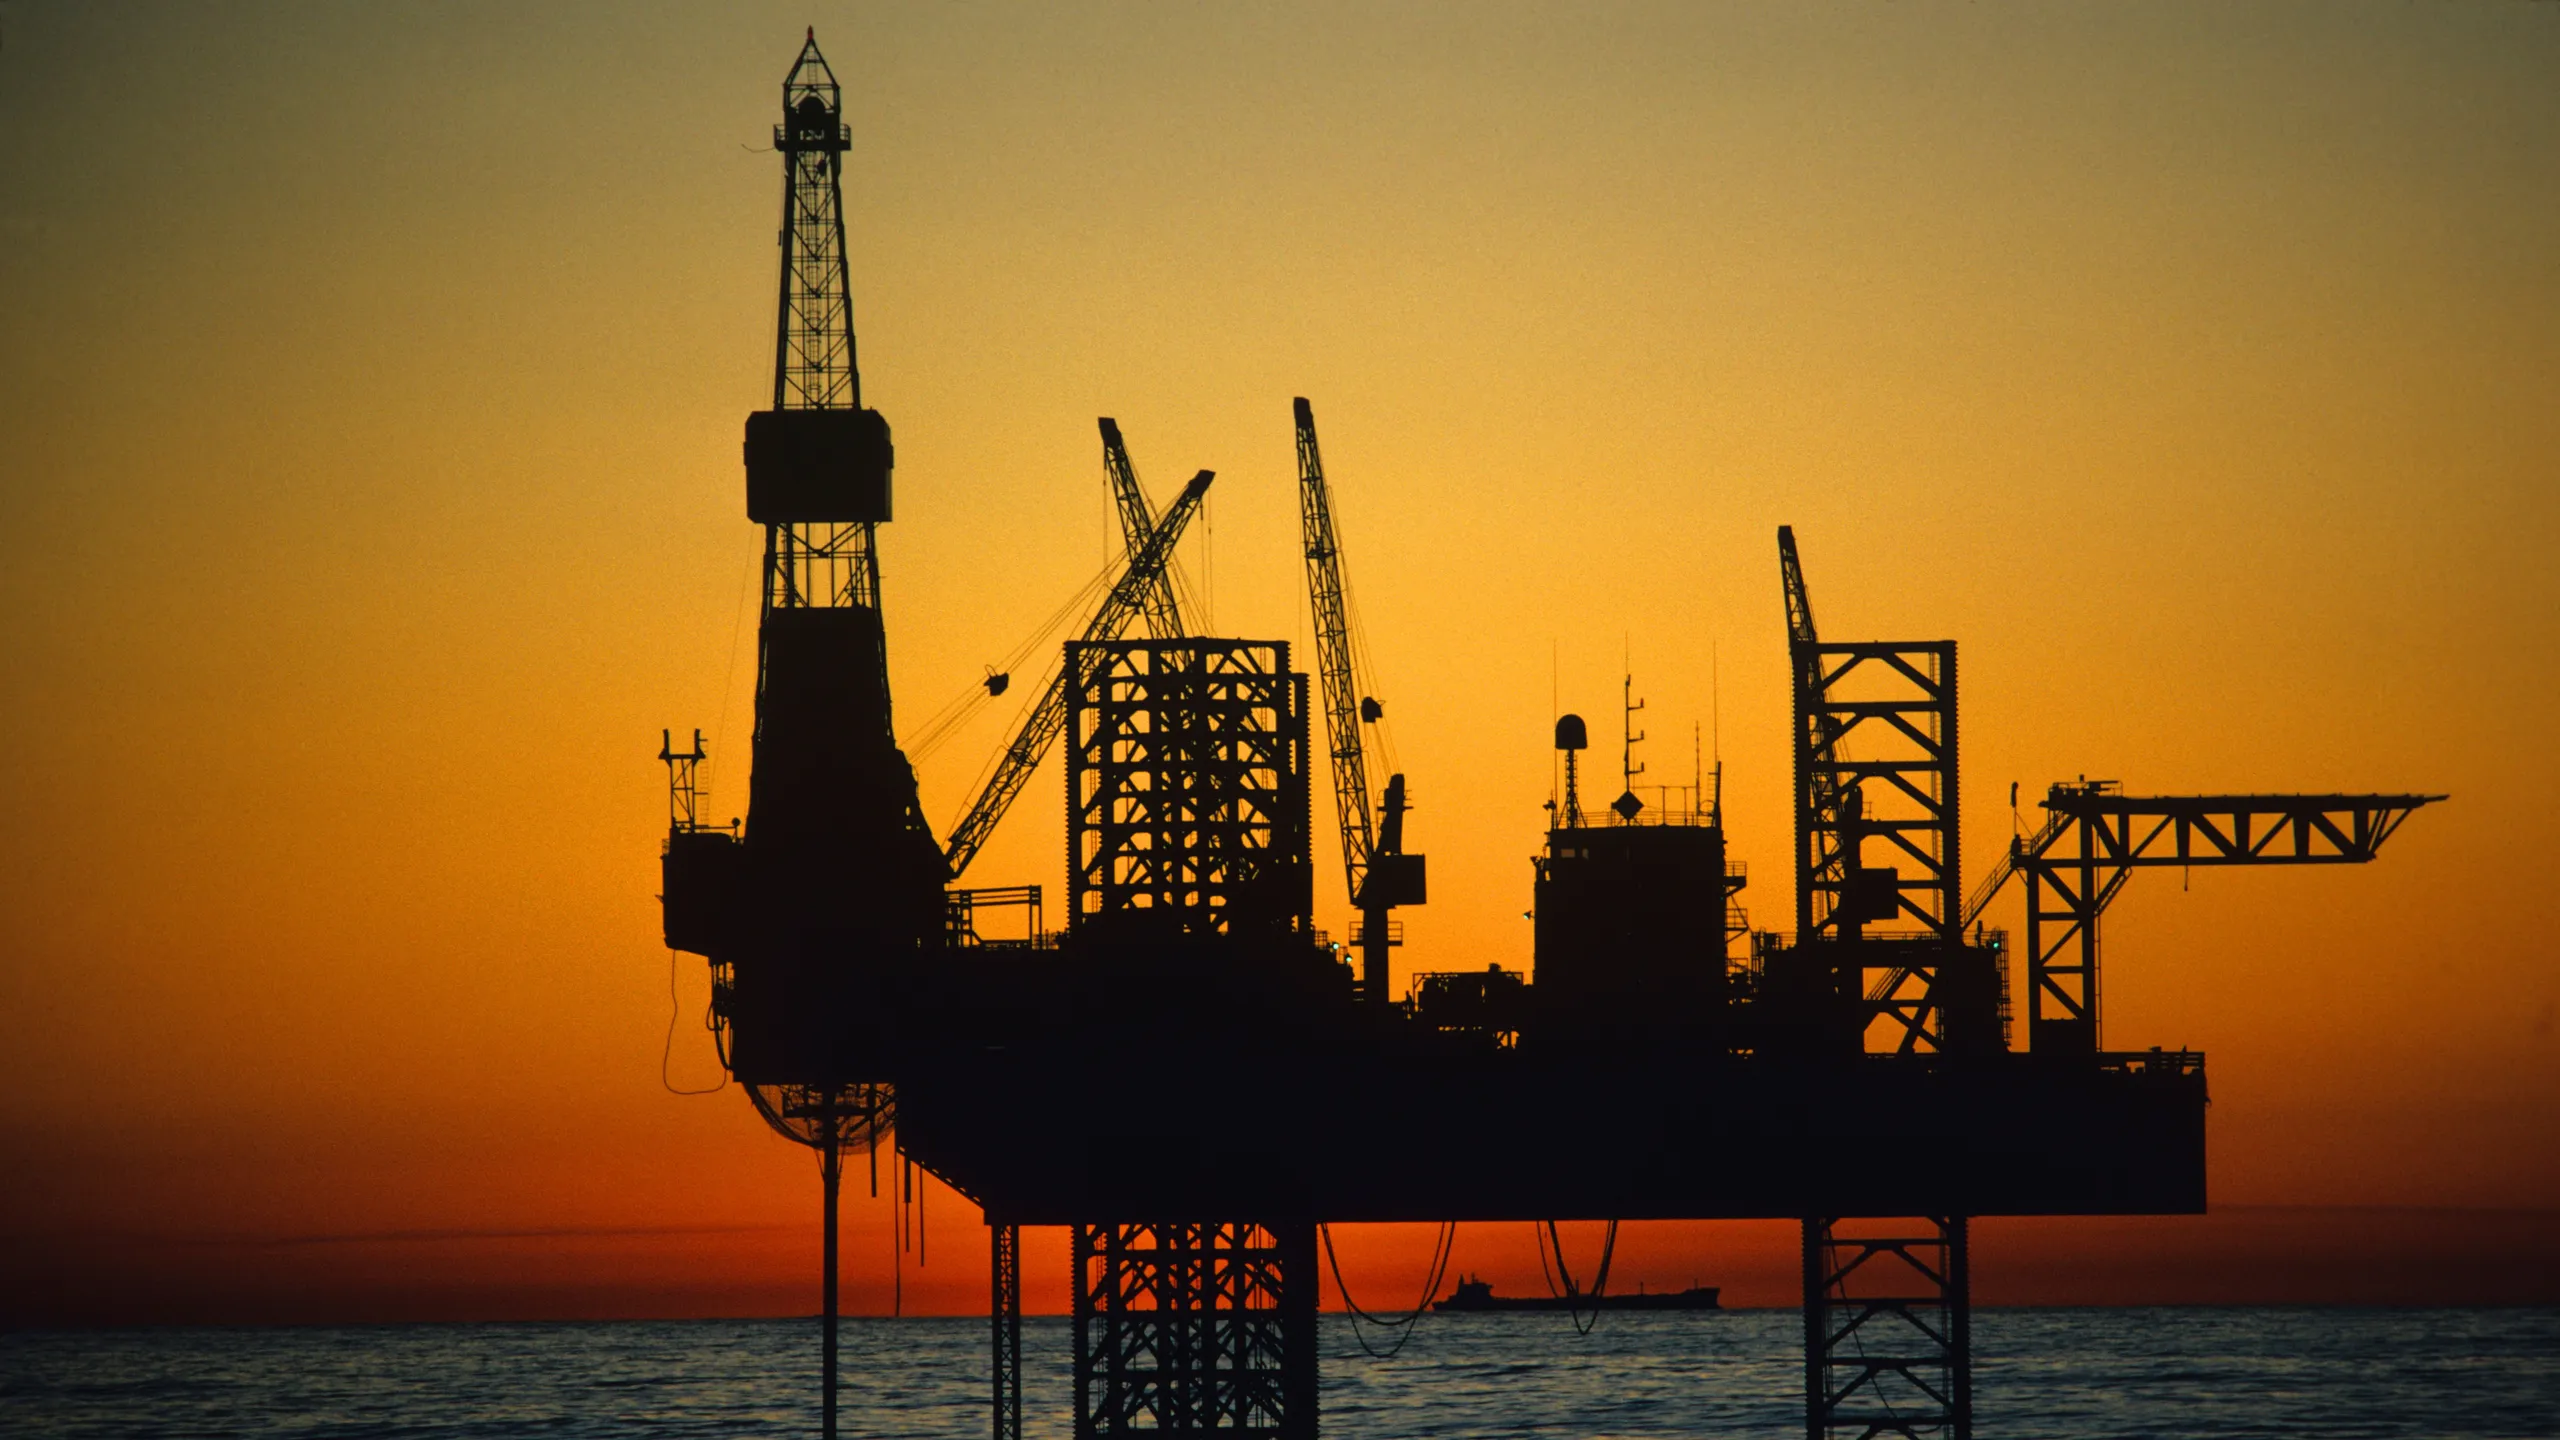 European-African collaborations reshaping oil and gas regulations across the continent